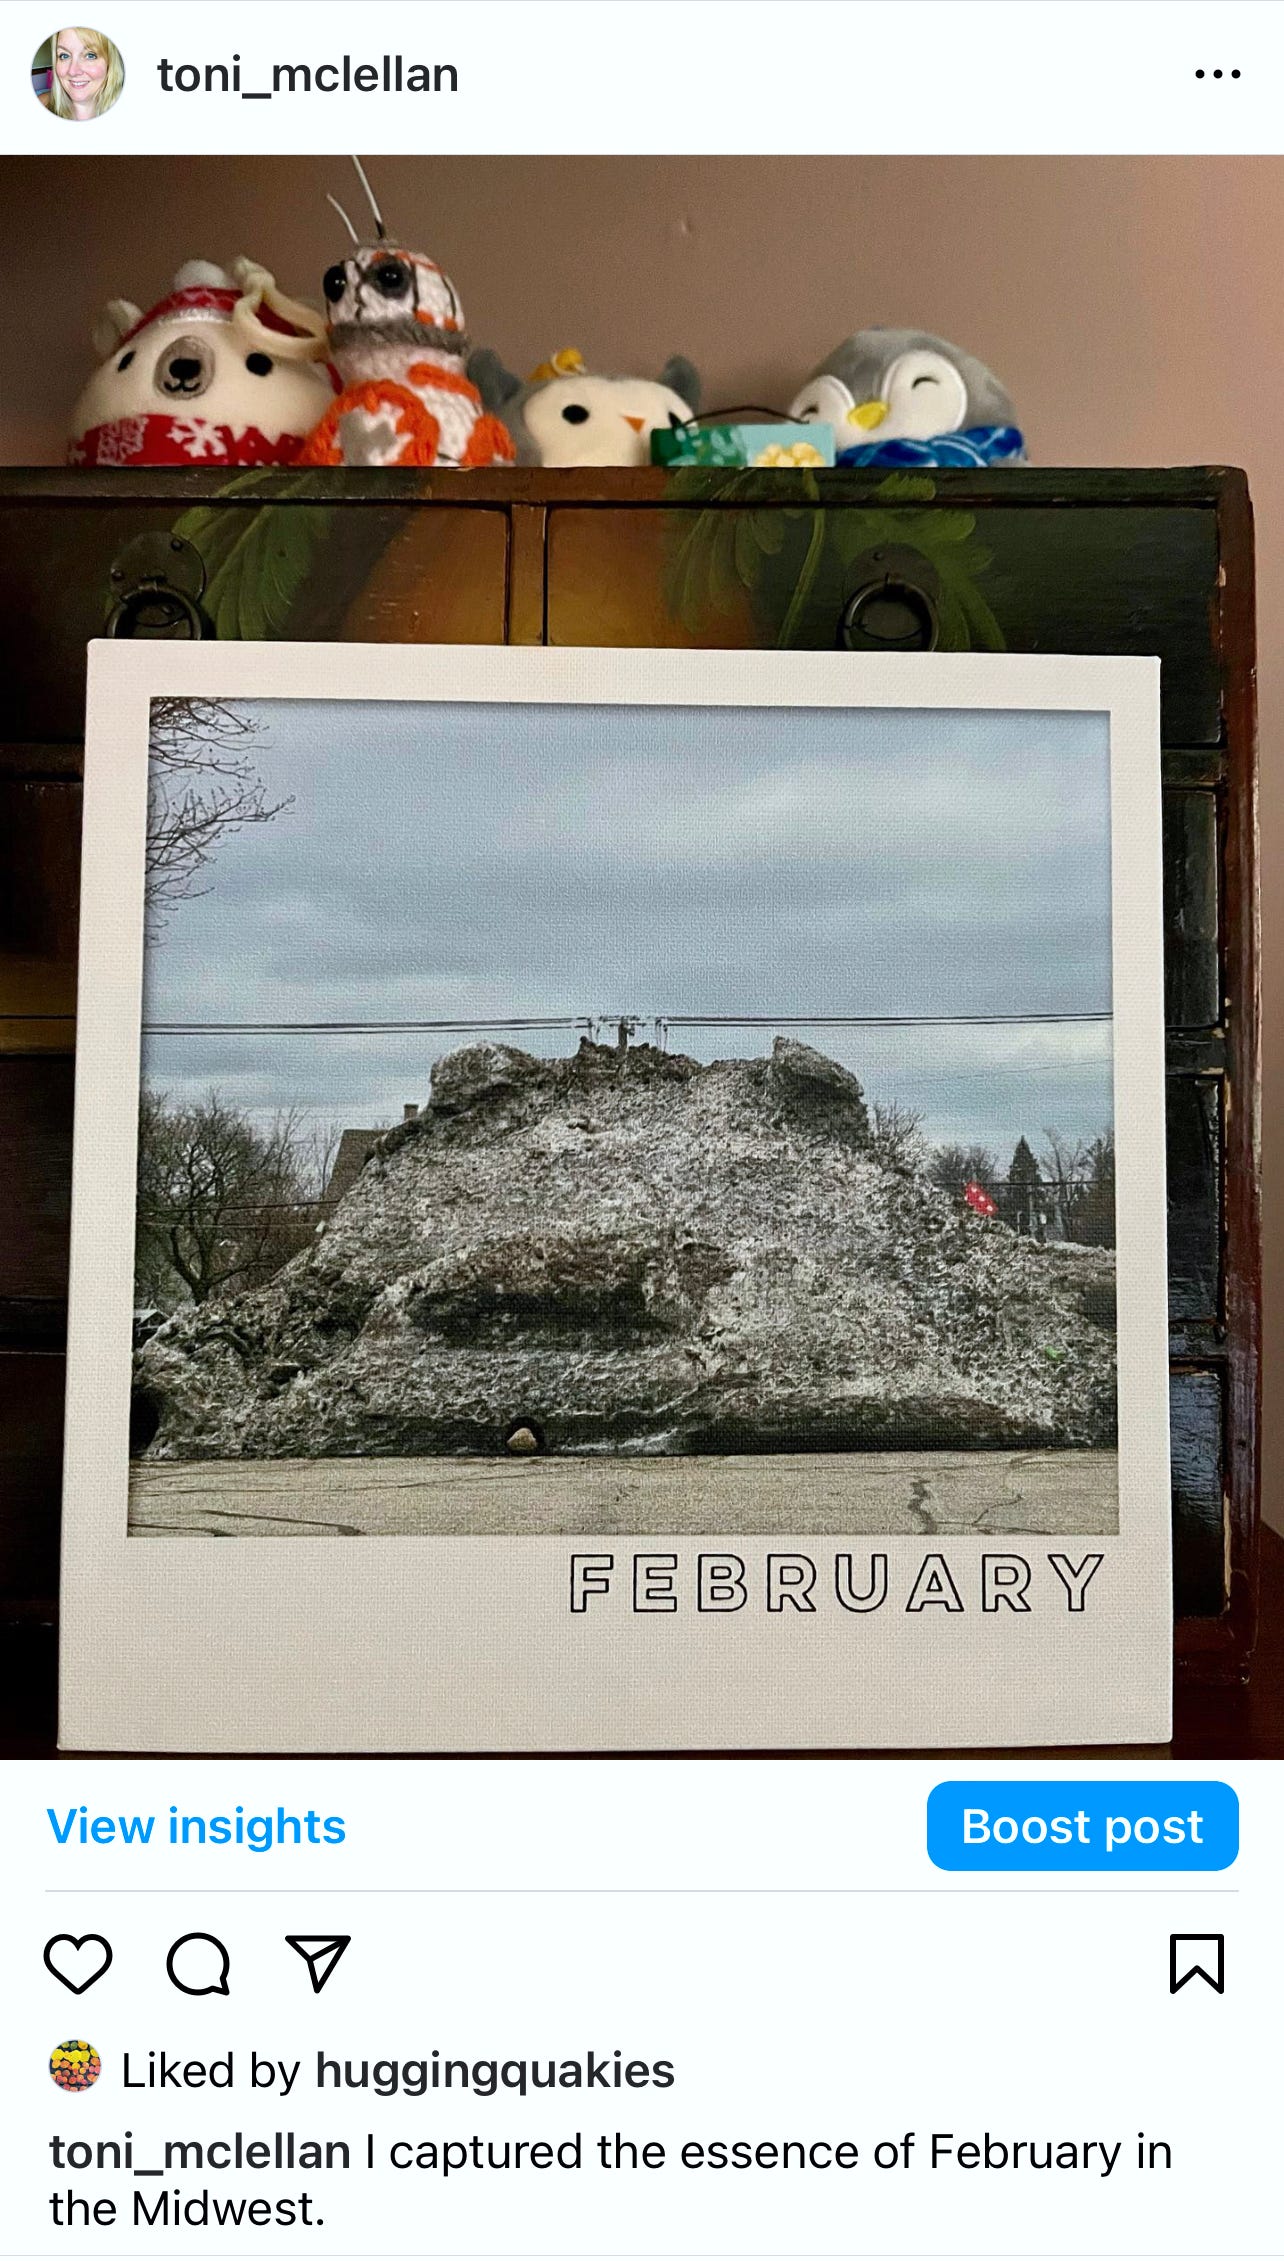 A photograph of a dirty snow pile that resembles Jabba the Hutt, captioned FEBRUARY